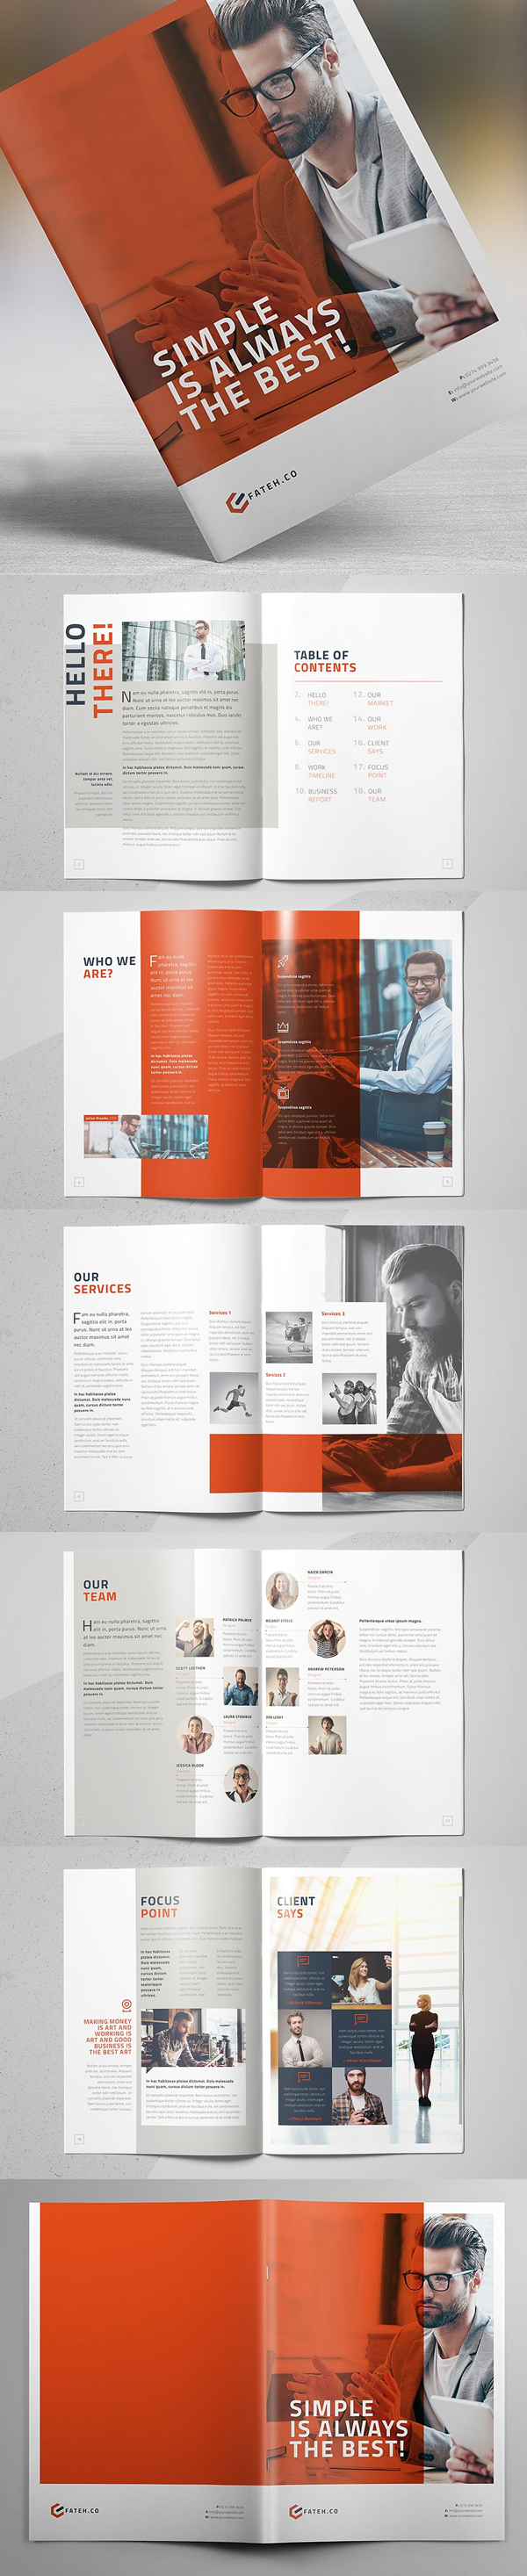 Business Brochure Template (20 Pages)